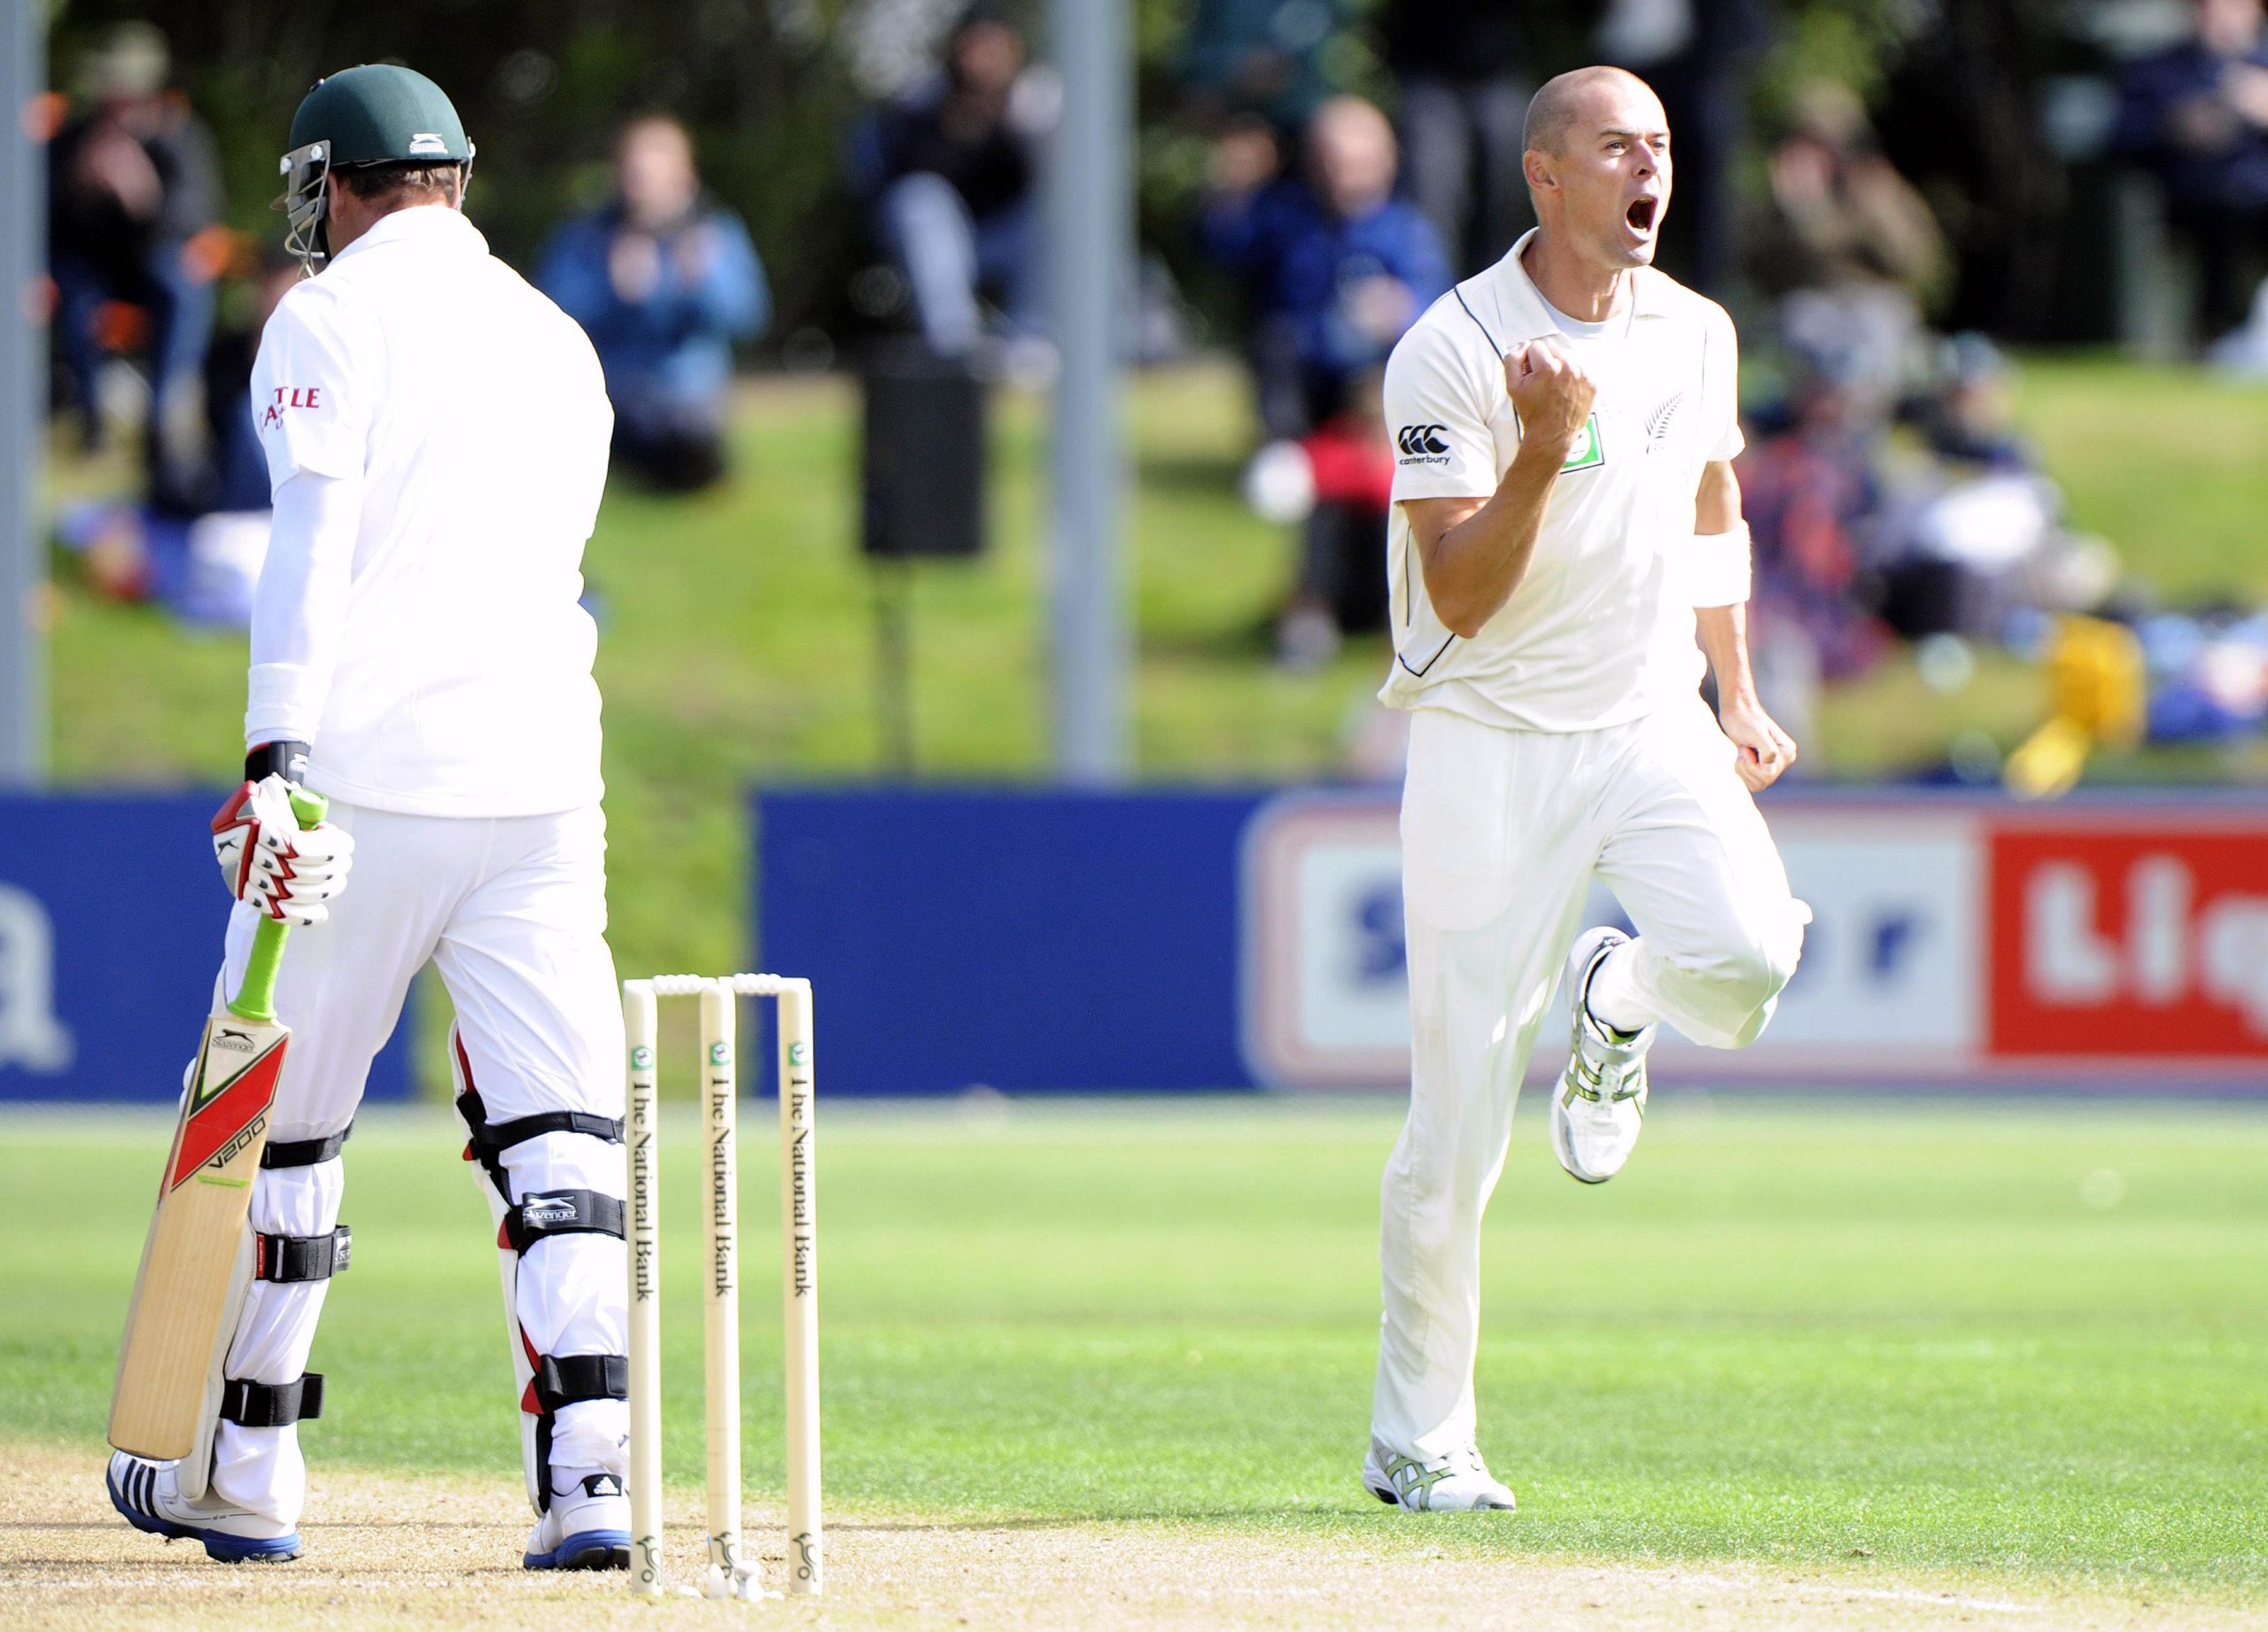 Chris Martin confined South Africa to 191-7 on the opening day – first Test